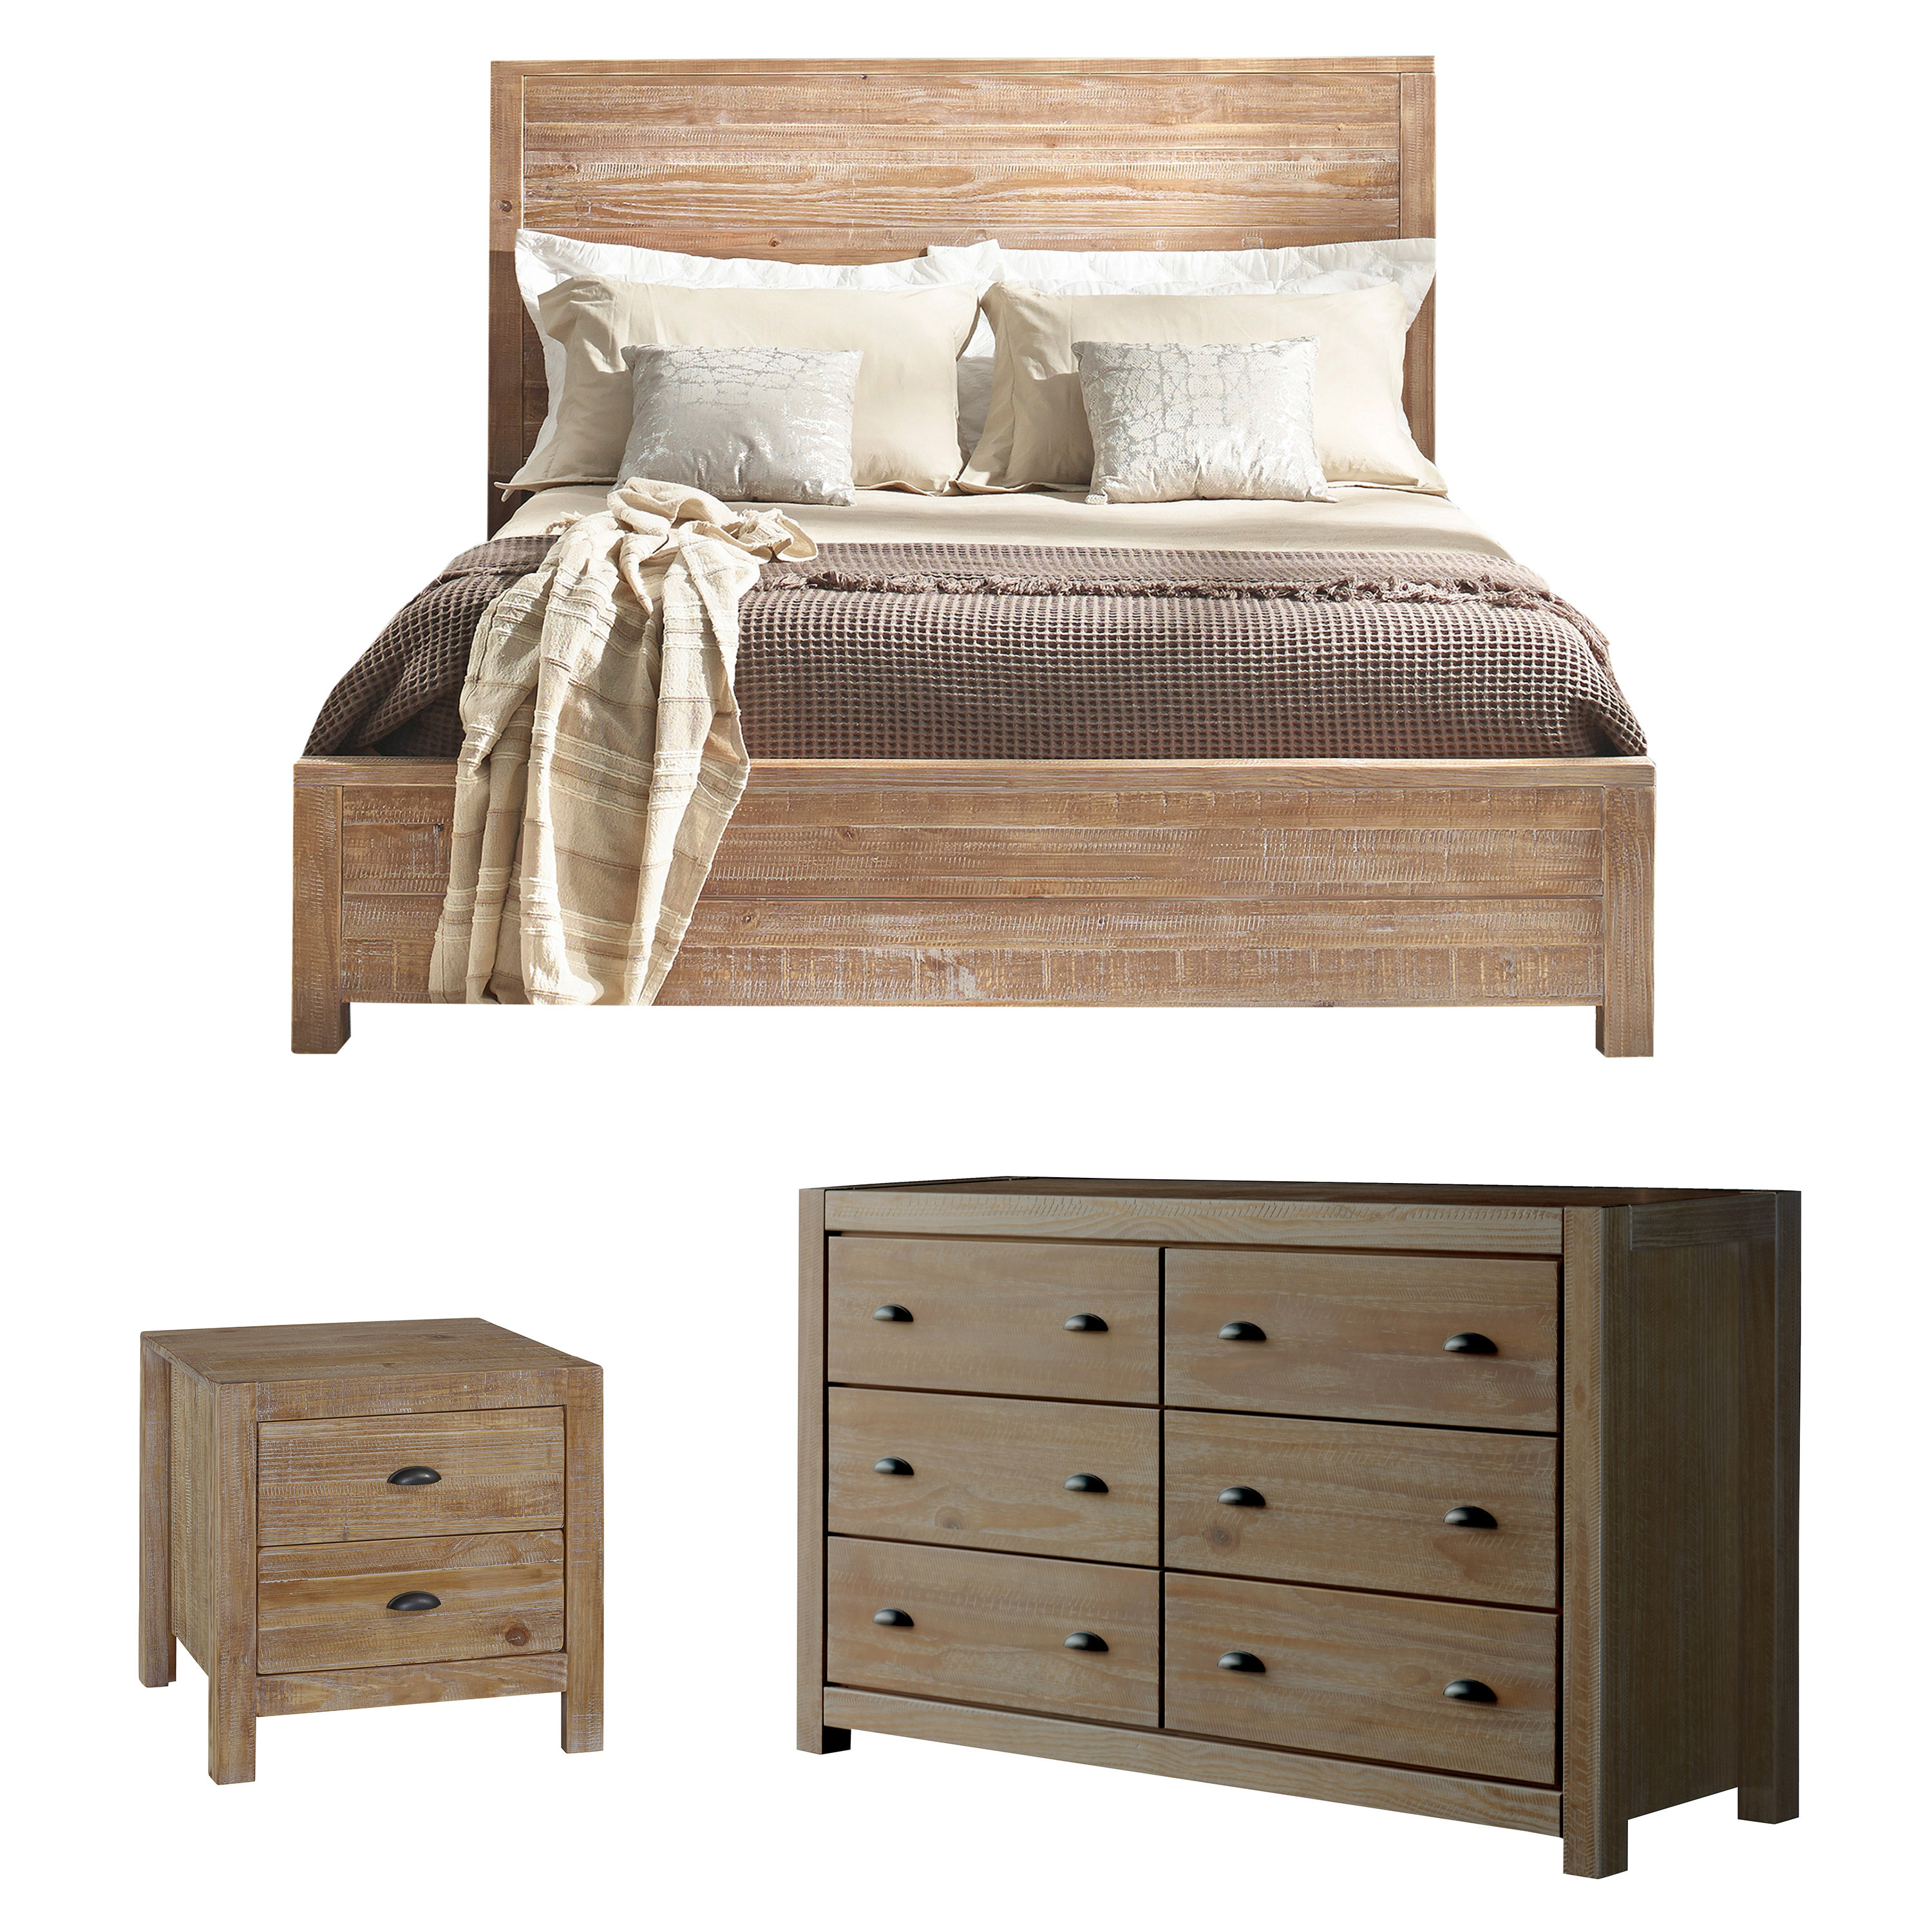 Modern Contemporary Bamboo Bedroom Furniture Allmodern in dimensions 3000 X 3000